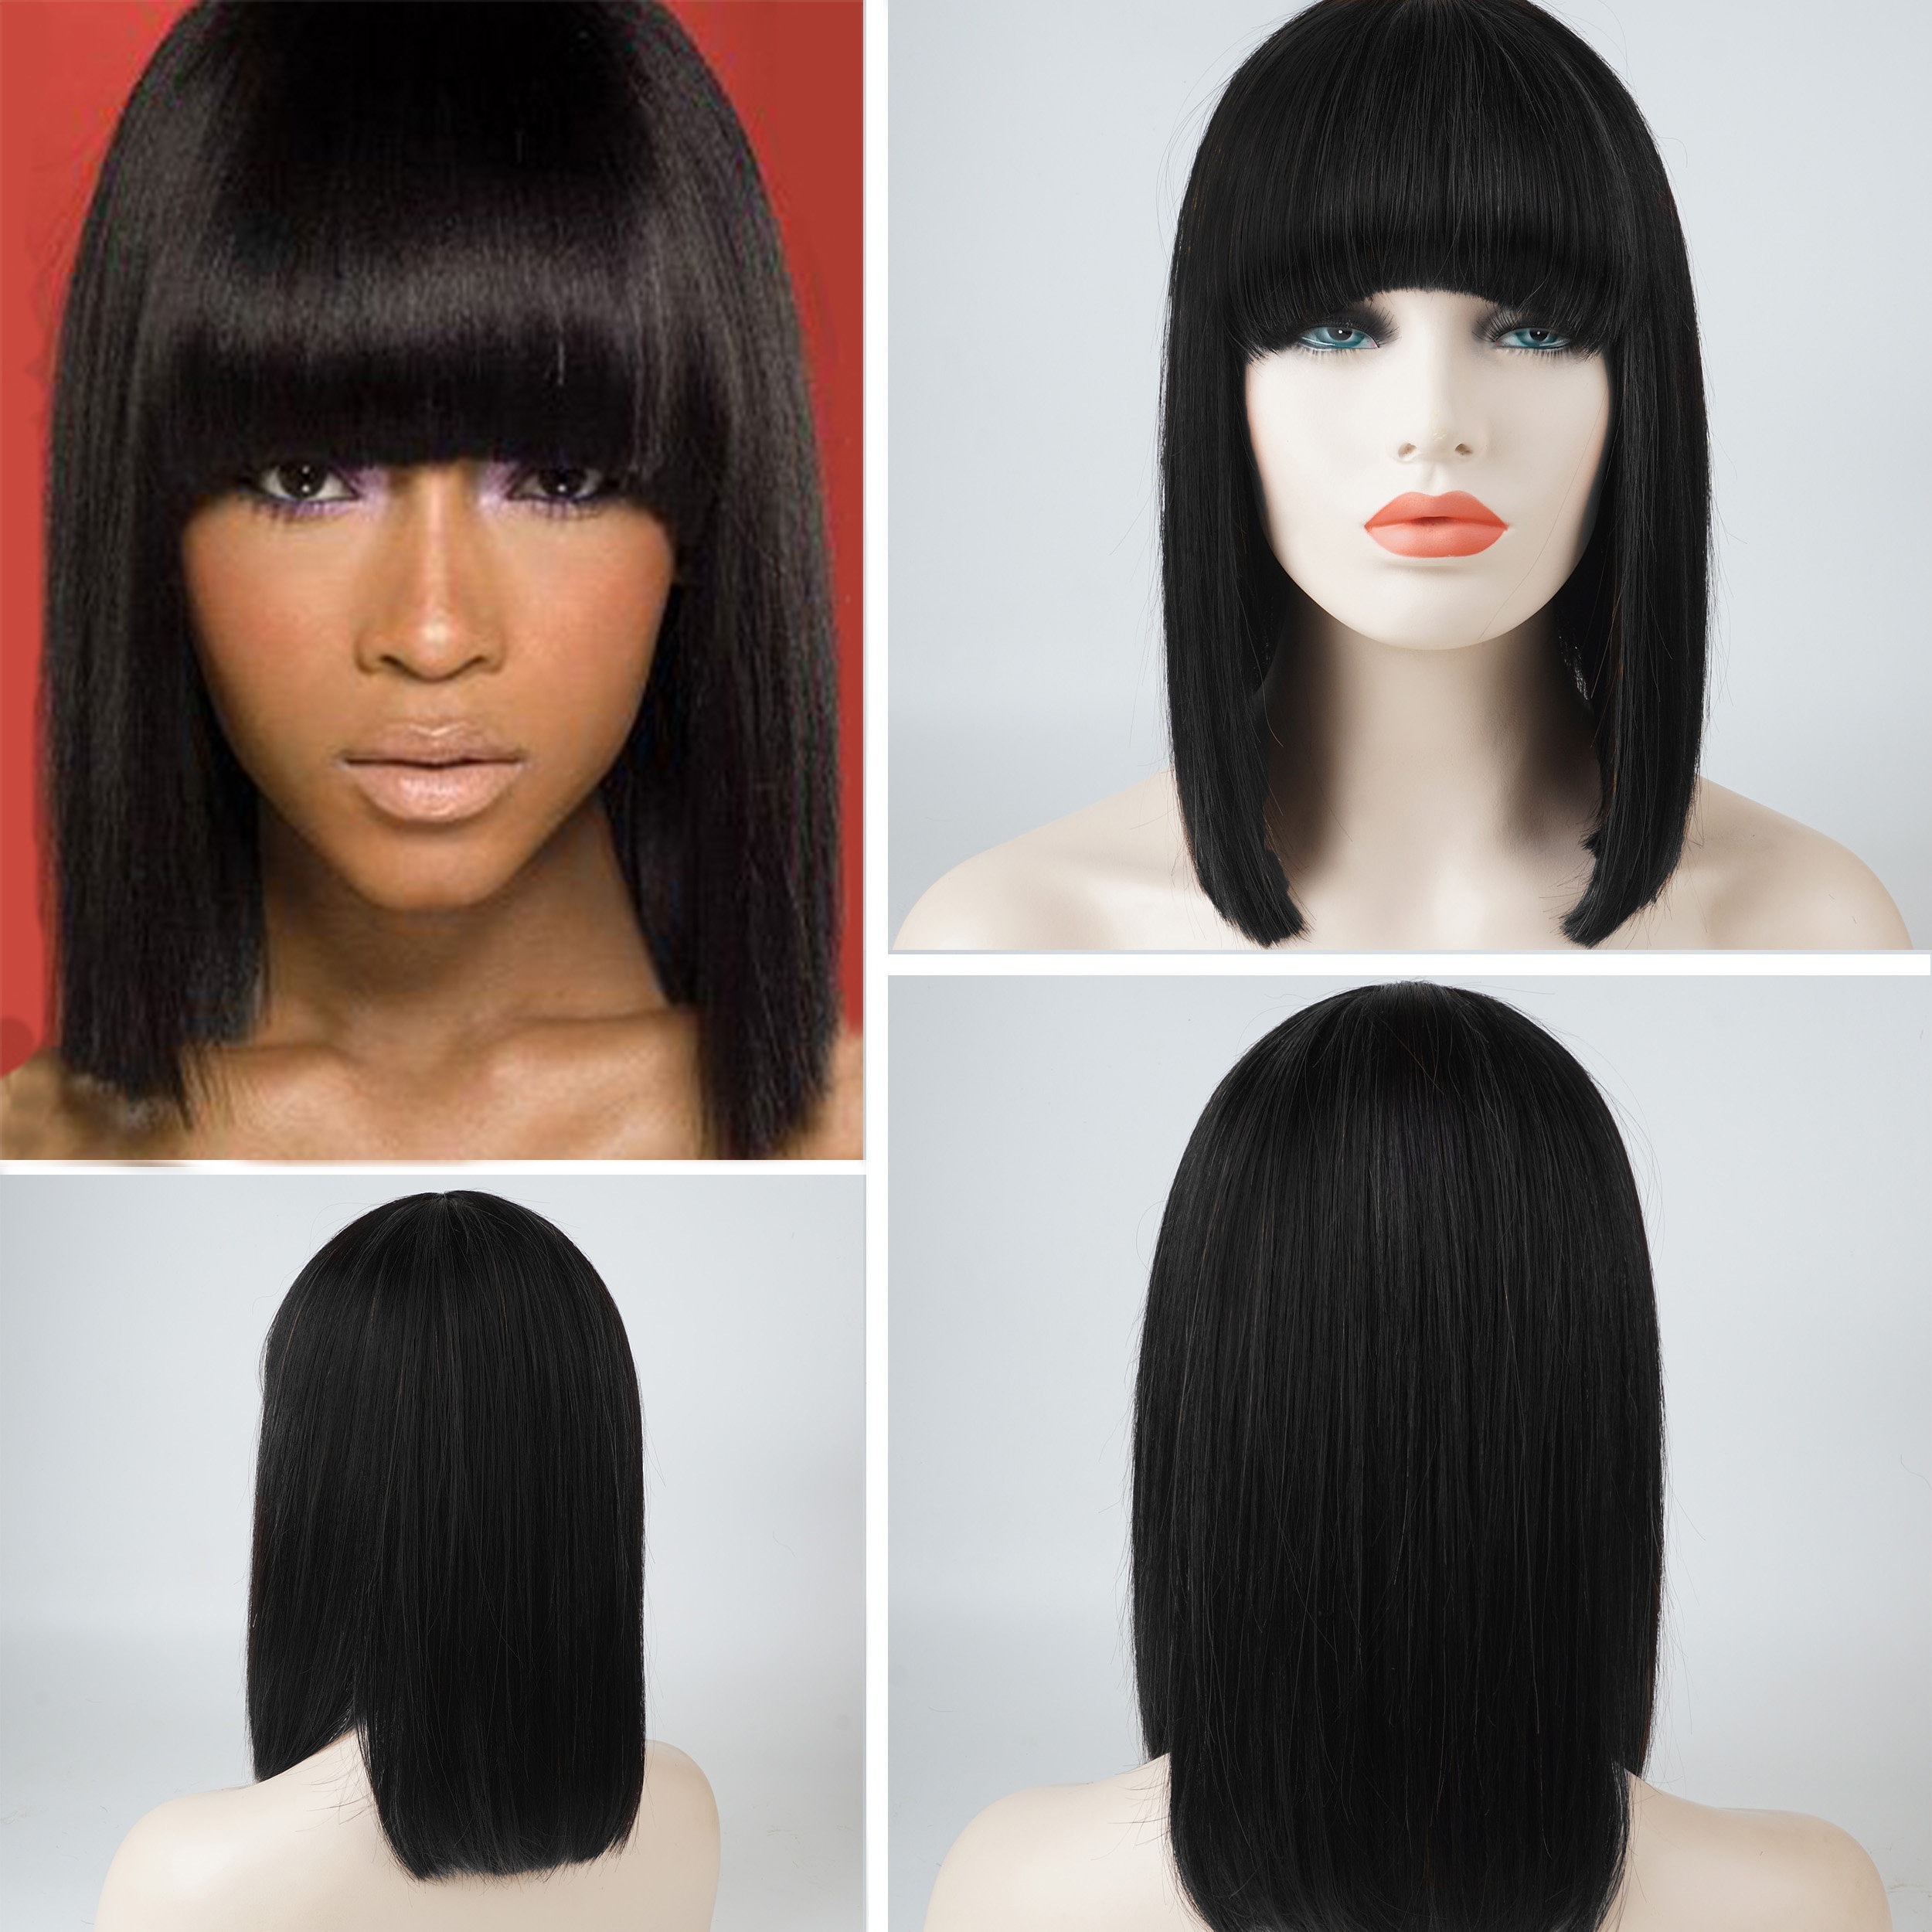 Bob Wig for Women No Lace Remy Human Hair Full Wig Cap 12 Inch